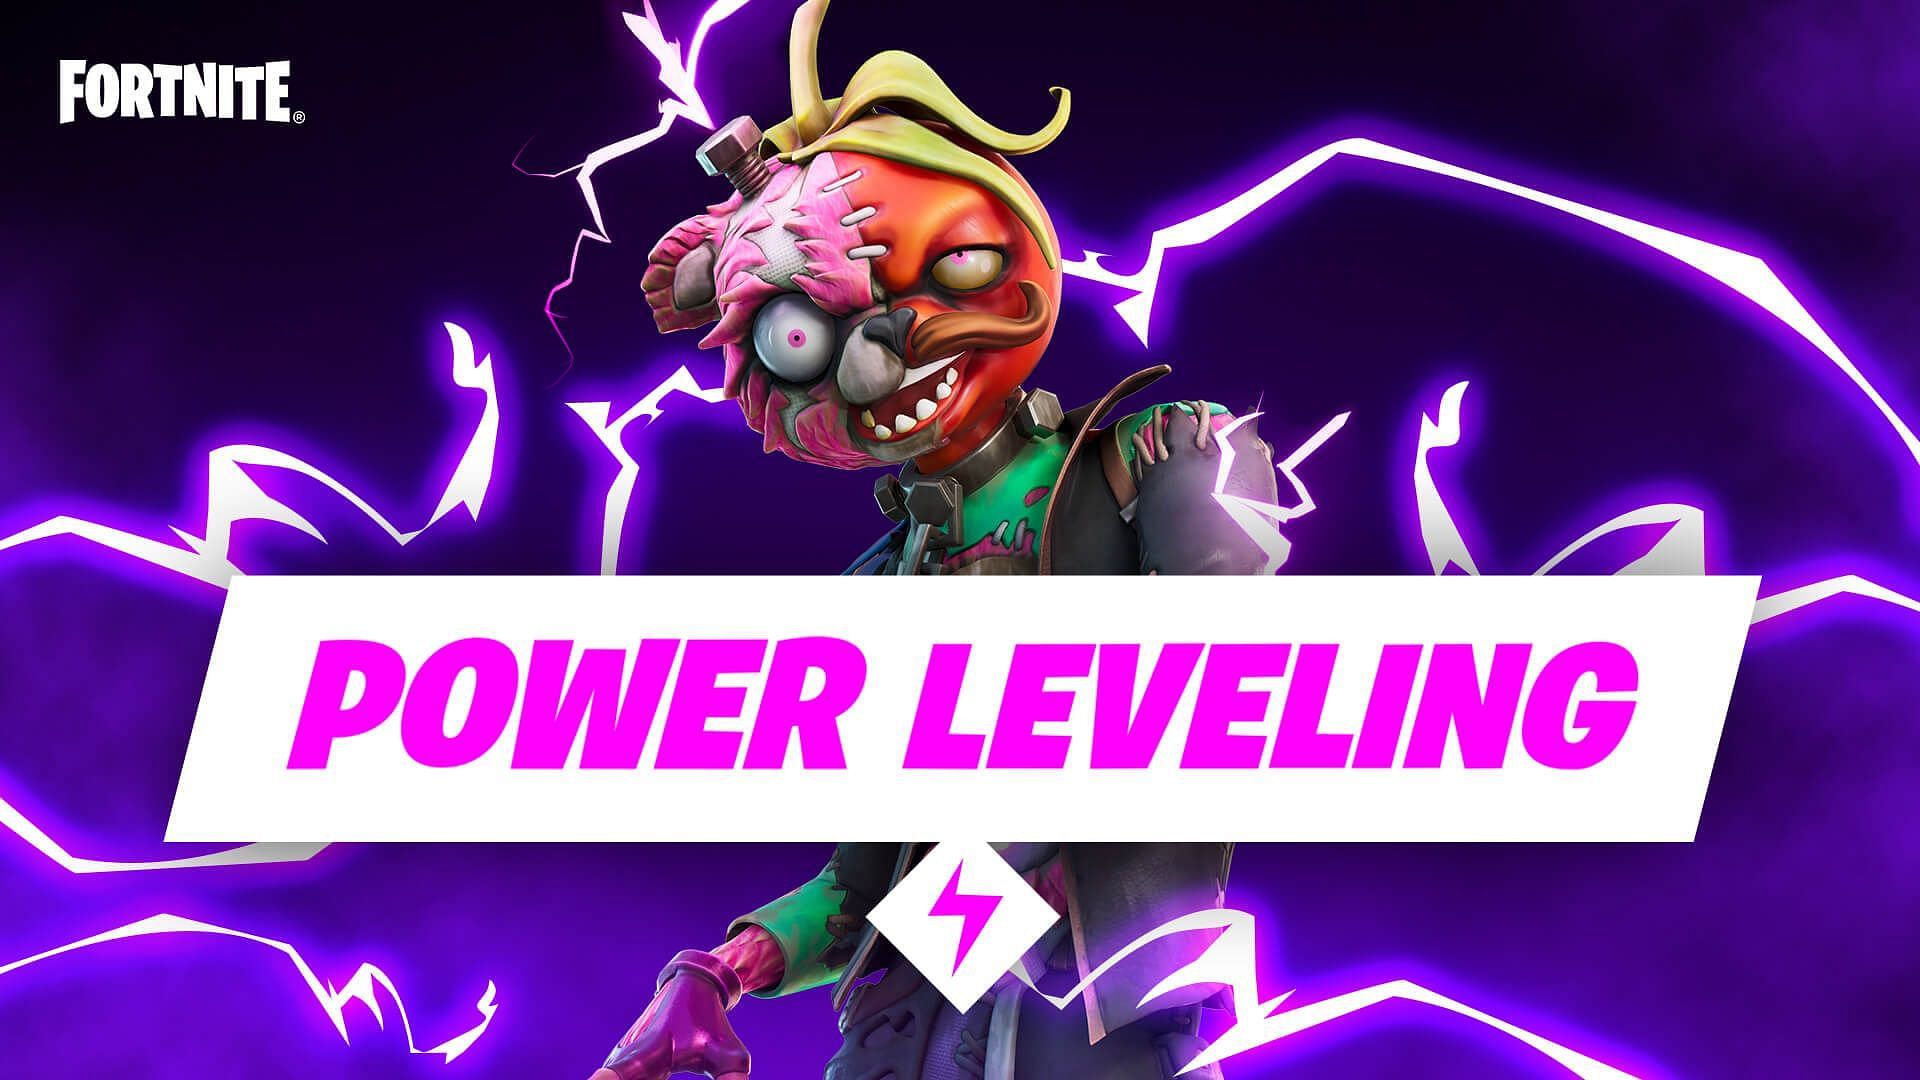 Supercharged XP in Fortnite is also called Power Leveling (Image via Epic Games)